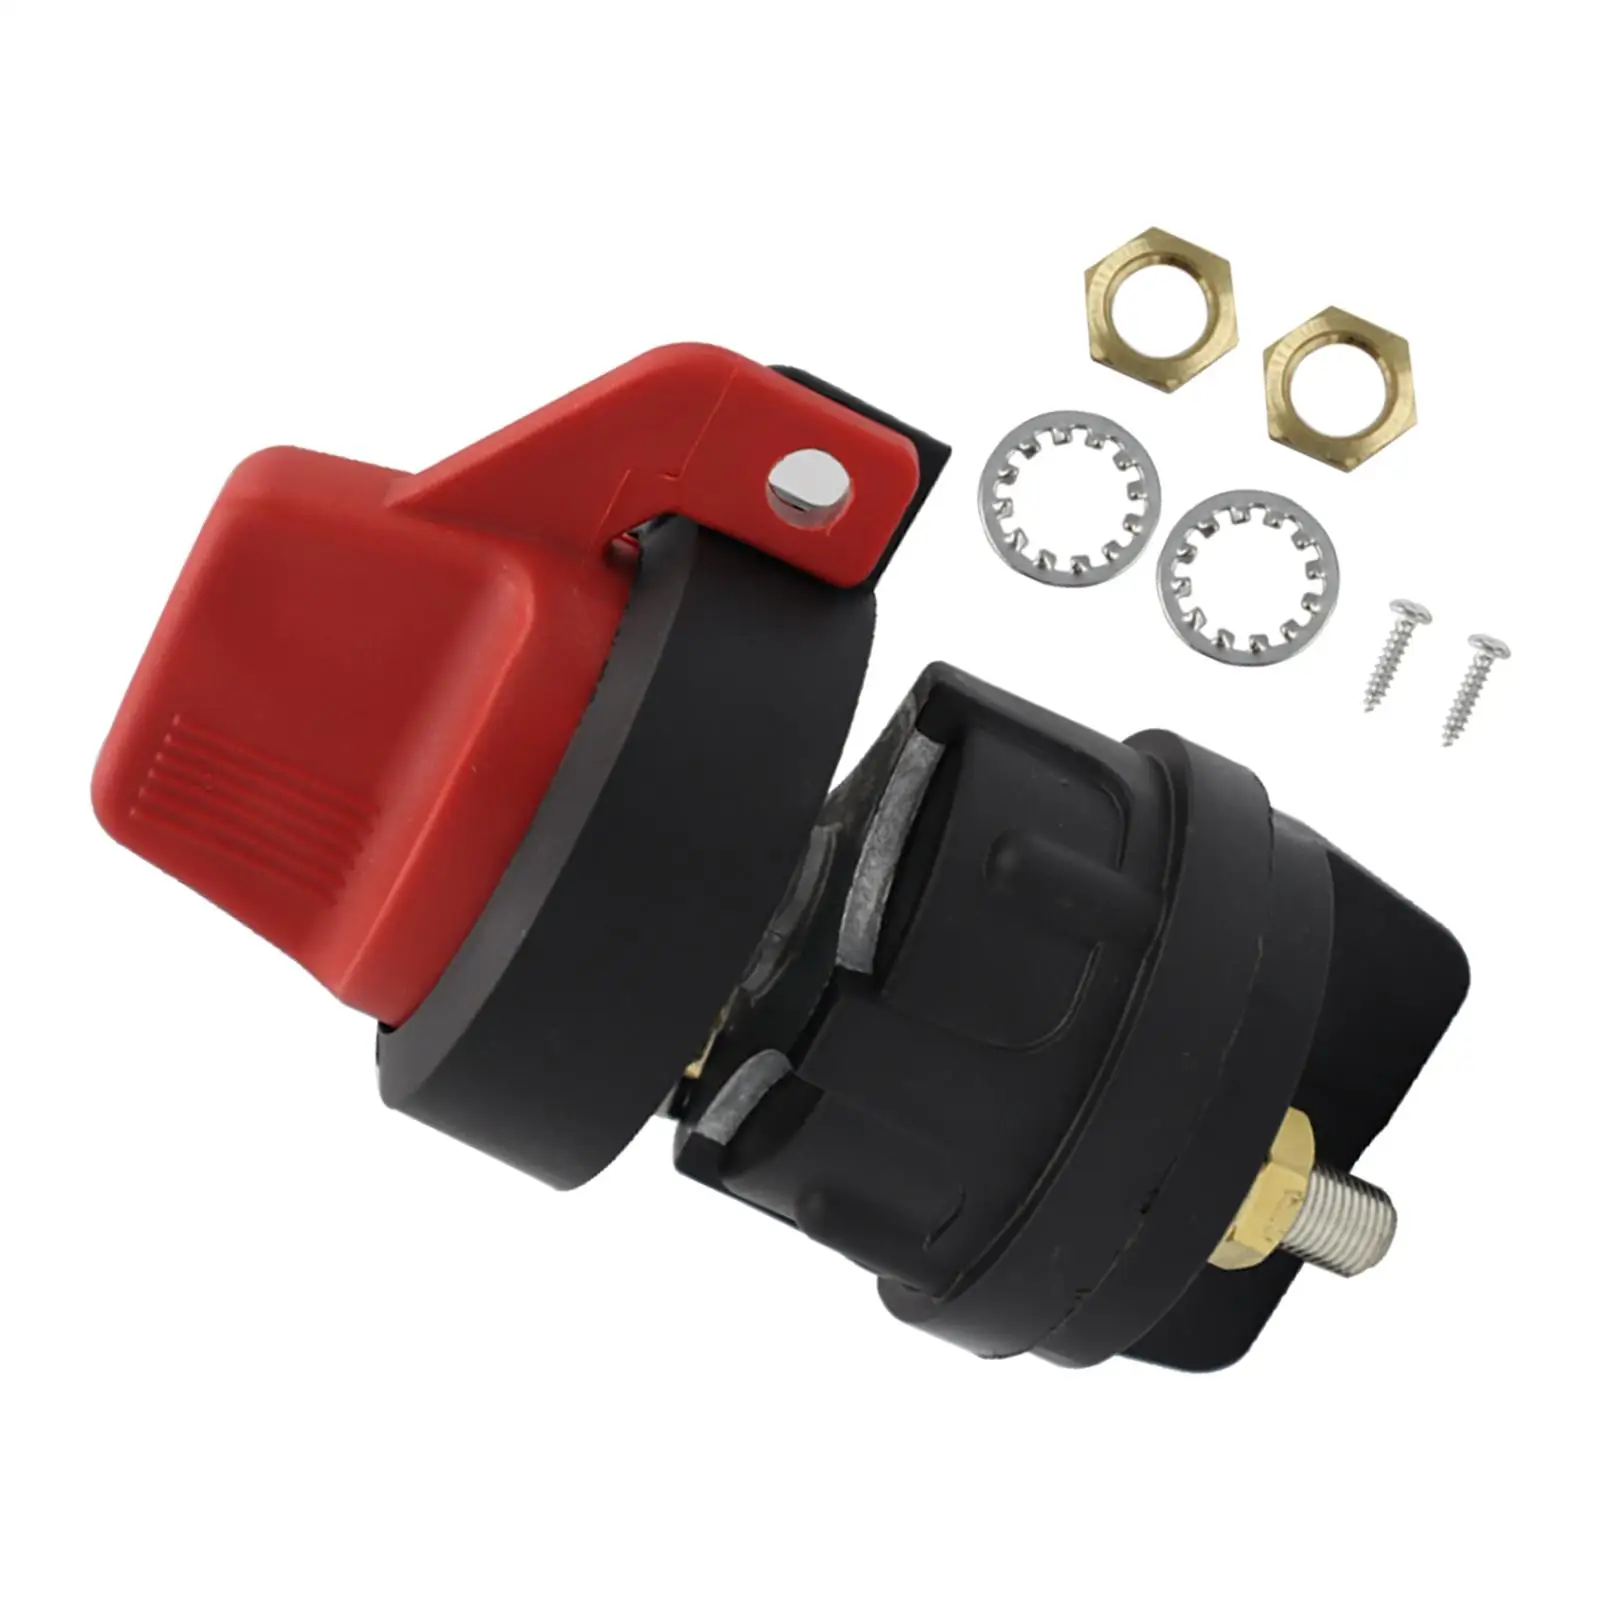 Isolator Lockable Switch 75920 Spst On/Off ,Built-In Security Locking for Vehicles Easy to Install Durable Replaces Accessories